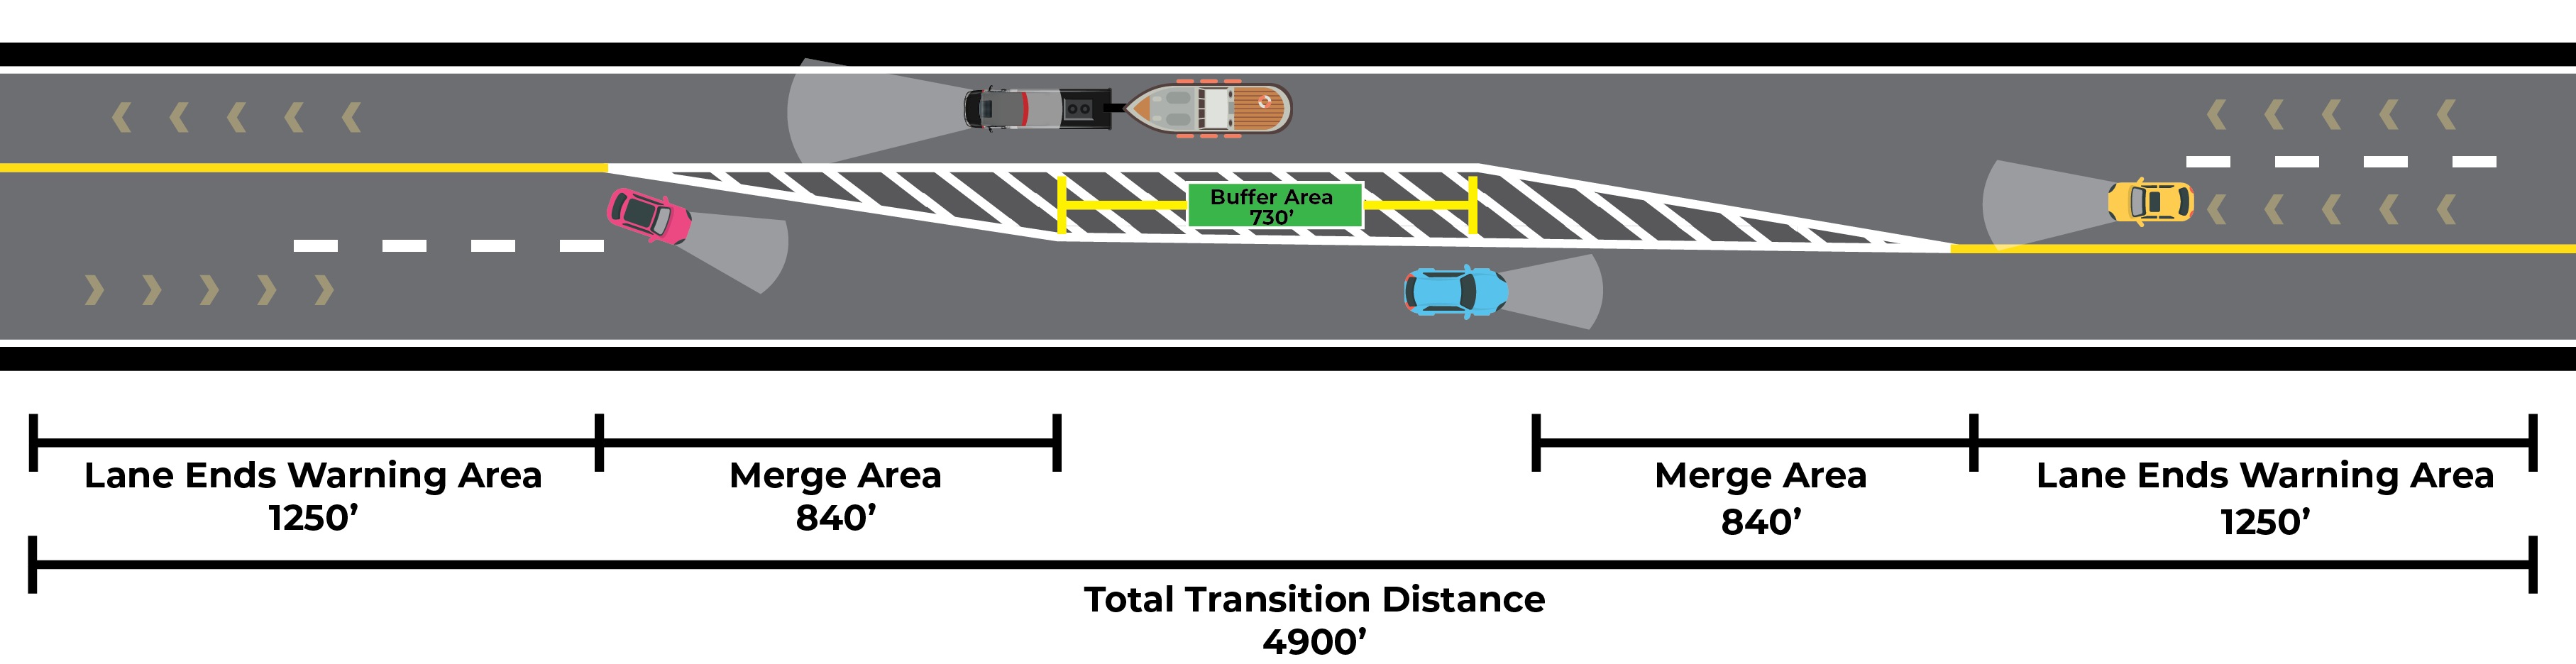 Graphic of alternating passing lanes along the inside lanes. with a buffer area of 730 feet between transitions.